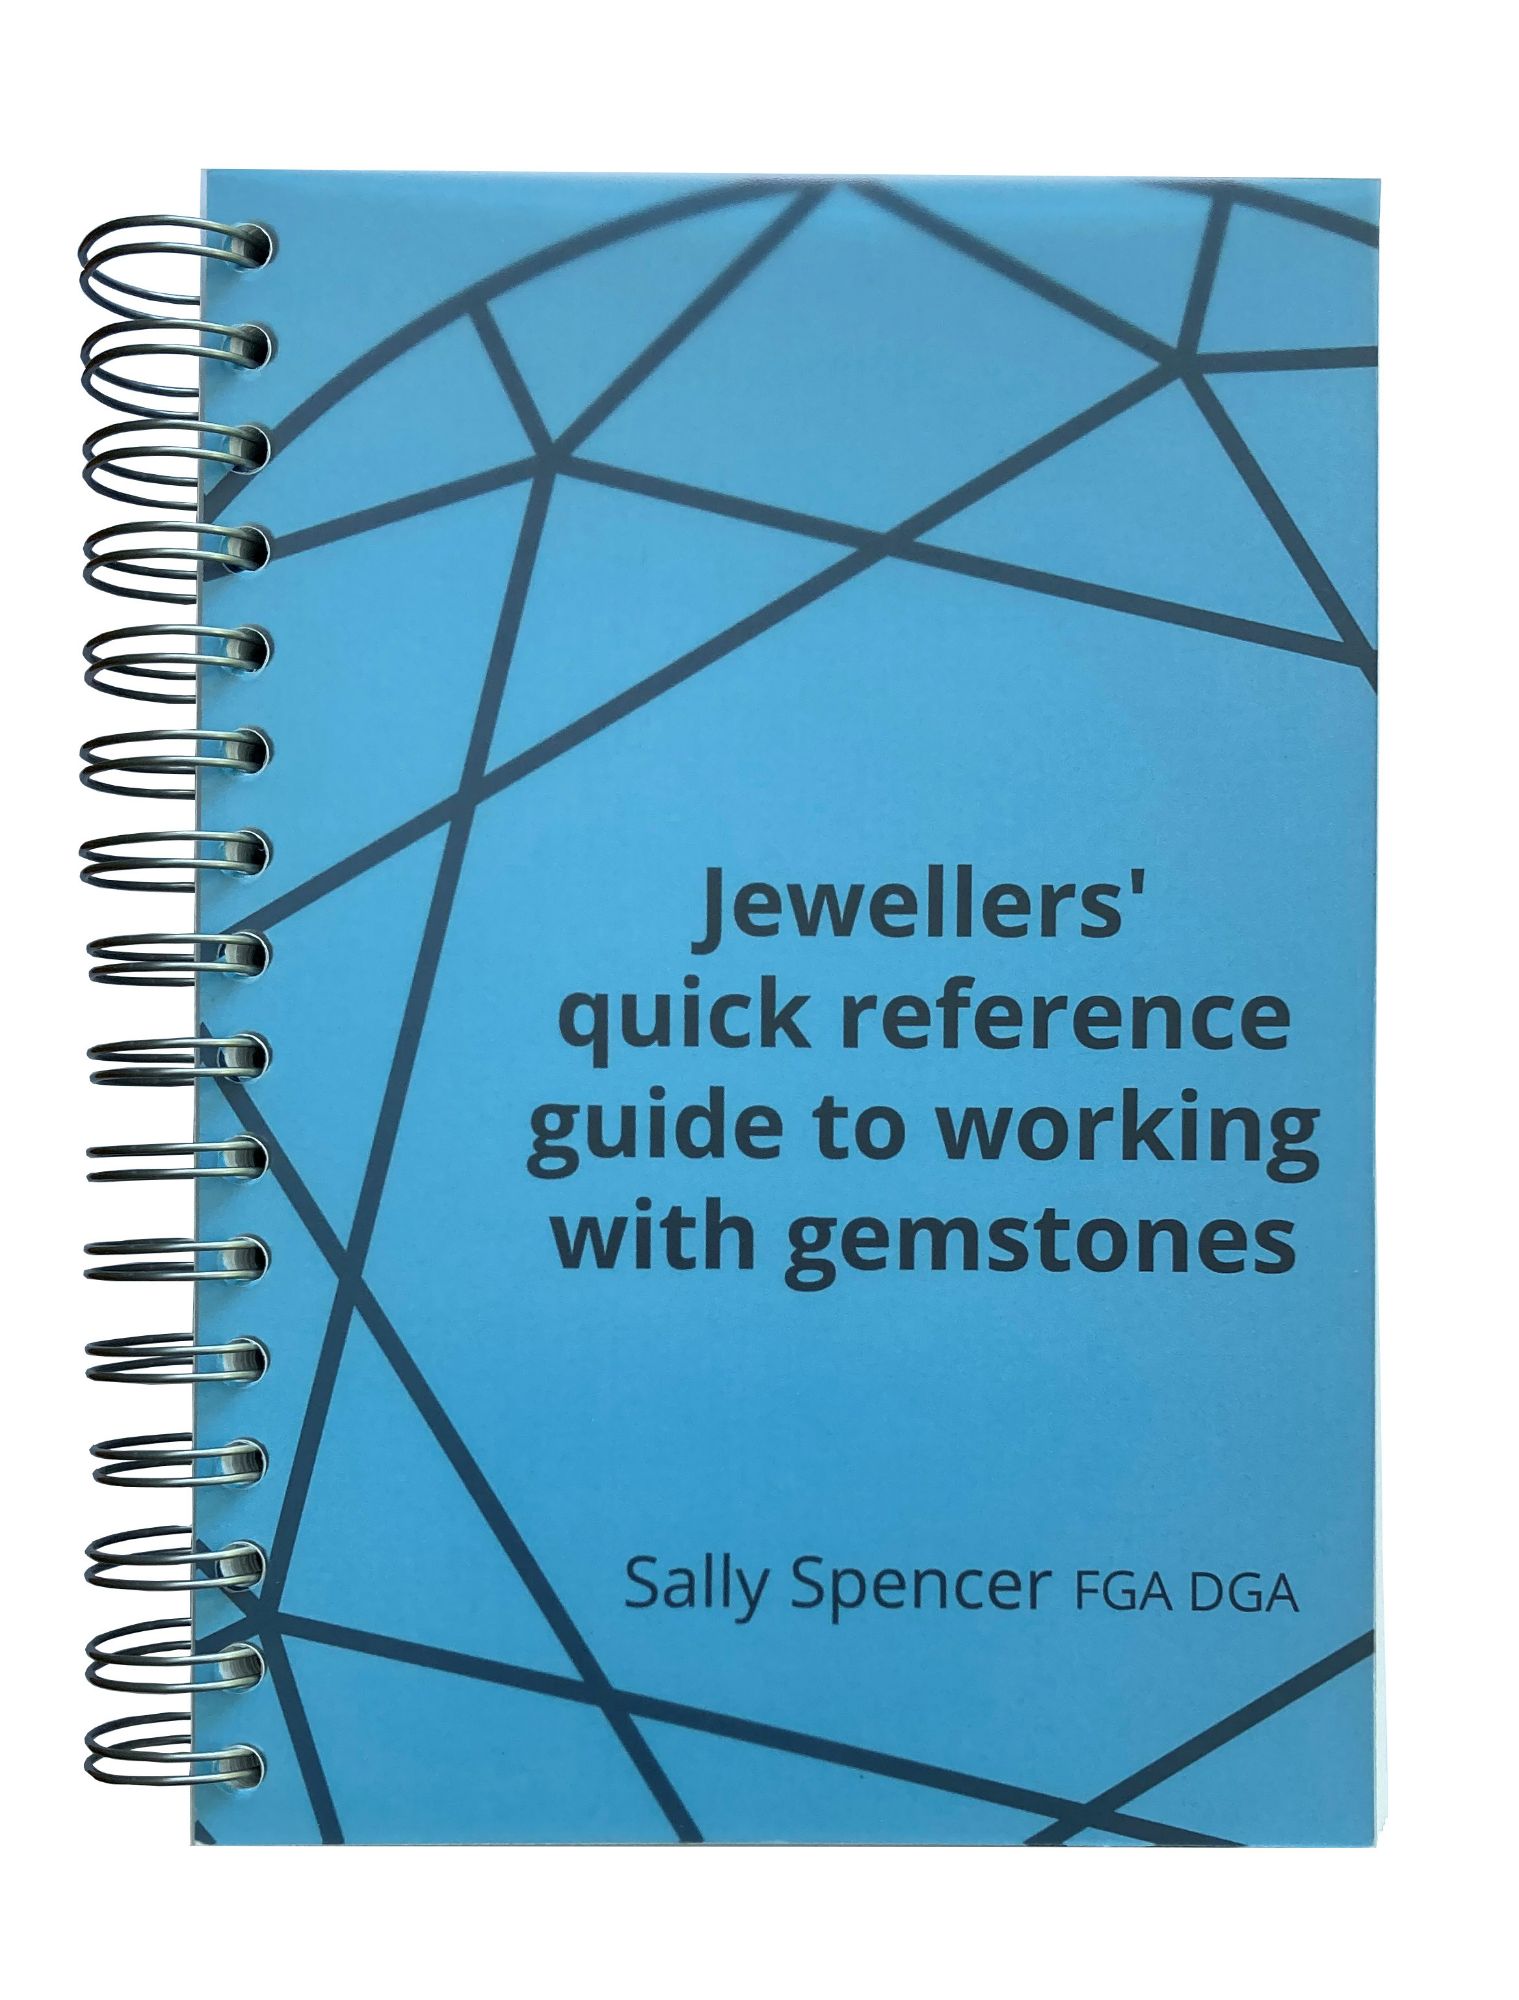 Jewellers quick reference guide to working with gemstones